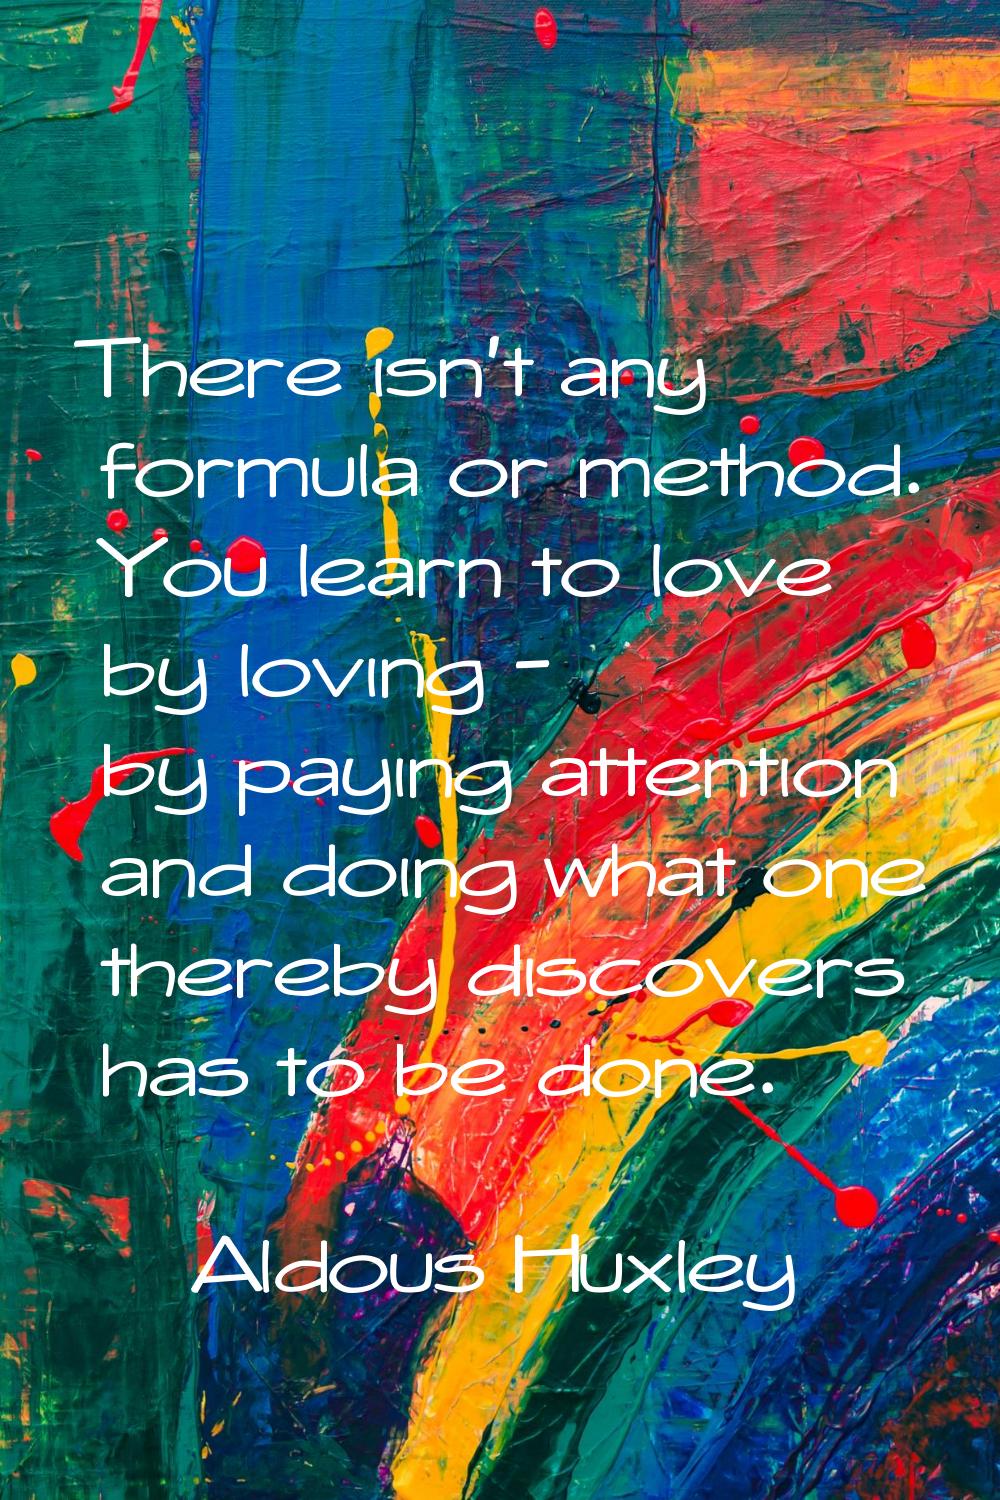 There isn't any formula or method. You learn to love by loving - by paying attention and doing what